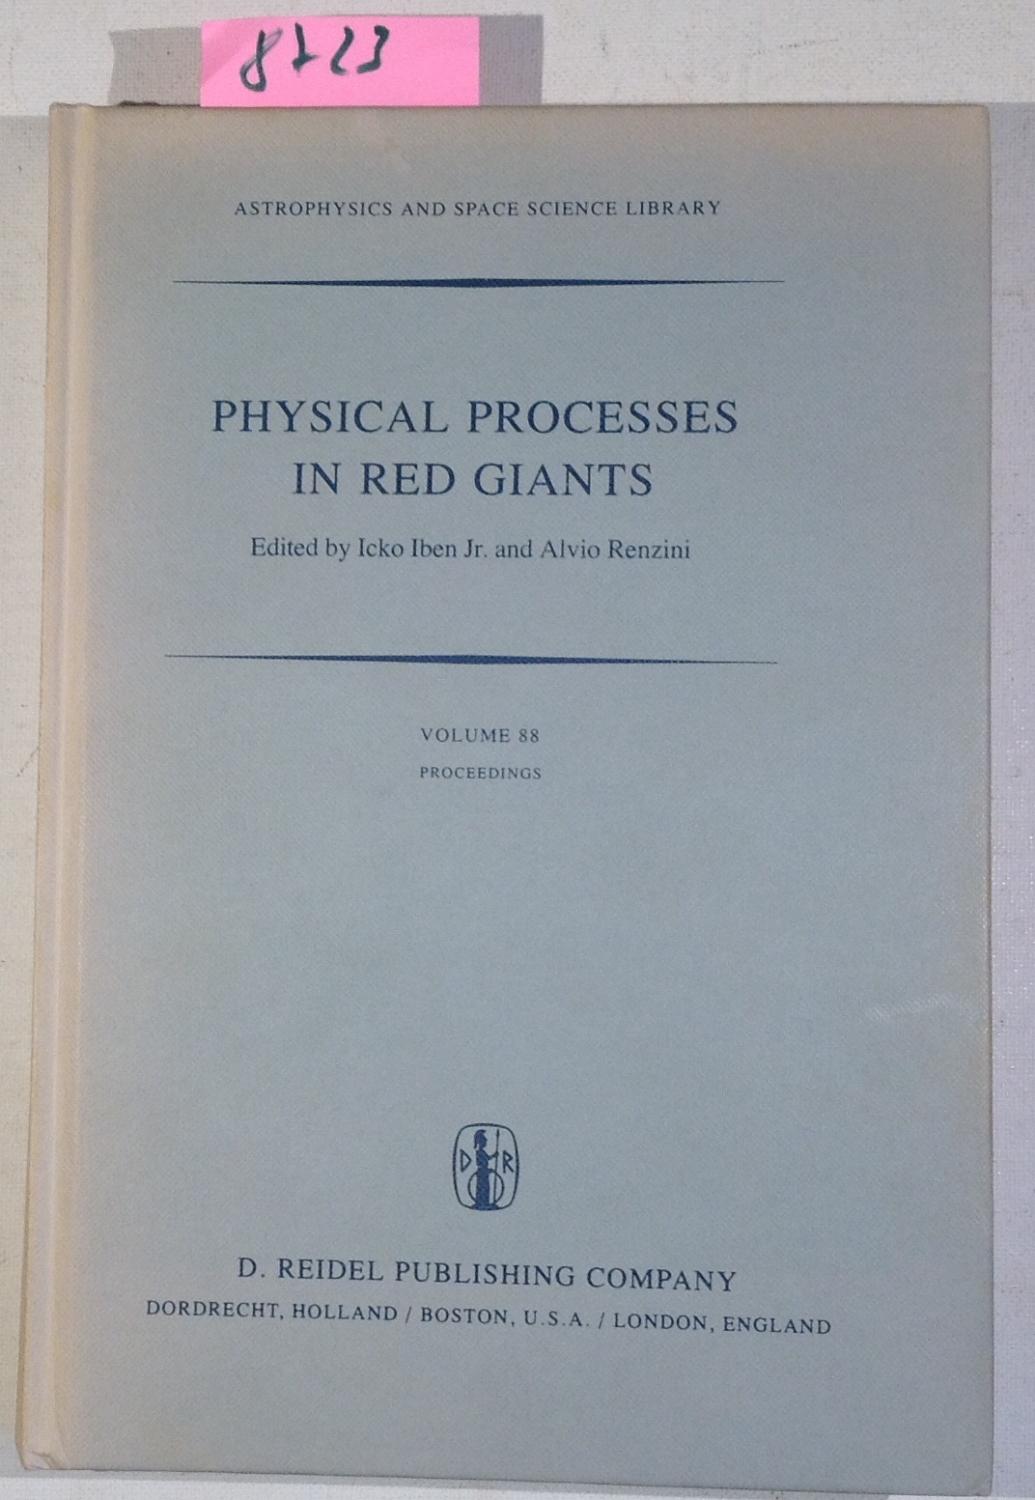 Physical Processes in Red Giants - Proceedings of the Second Workshop, Held at the Ettore Majorana Centre for Scientific Culture, Advanced School of Astronomy, in Erice, Sicily, Italy, September 3 - 13, 1980 - - Astrophysics and Space Science Library, 88 - Iben, Icko / Renzini, Alvio - Editors